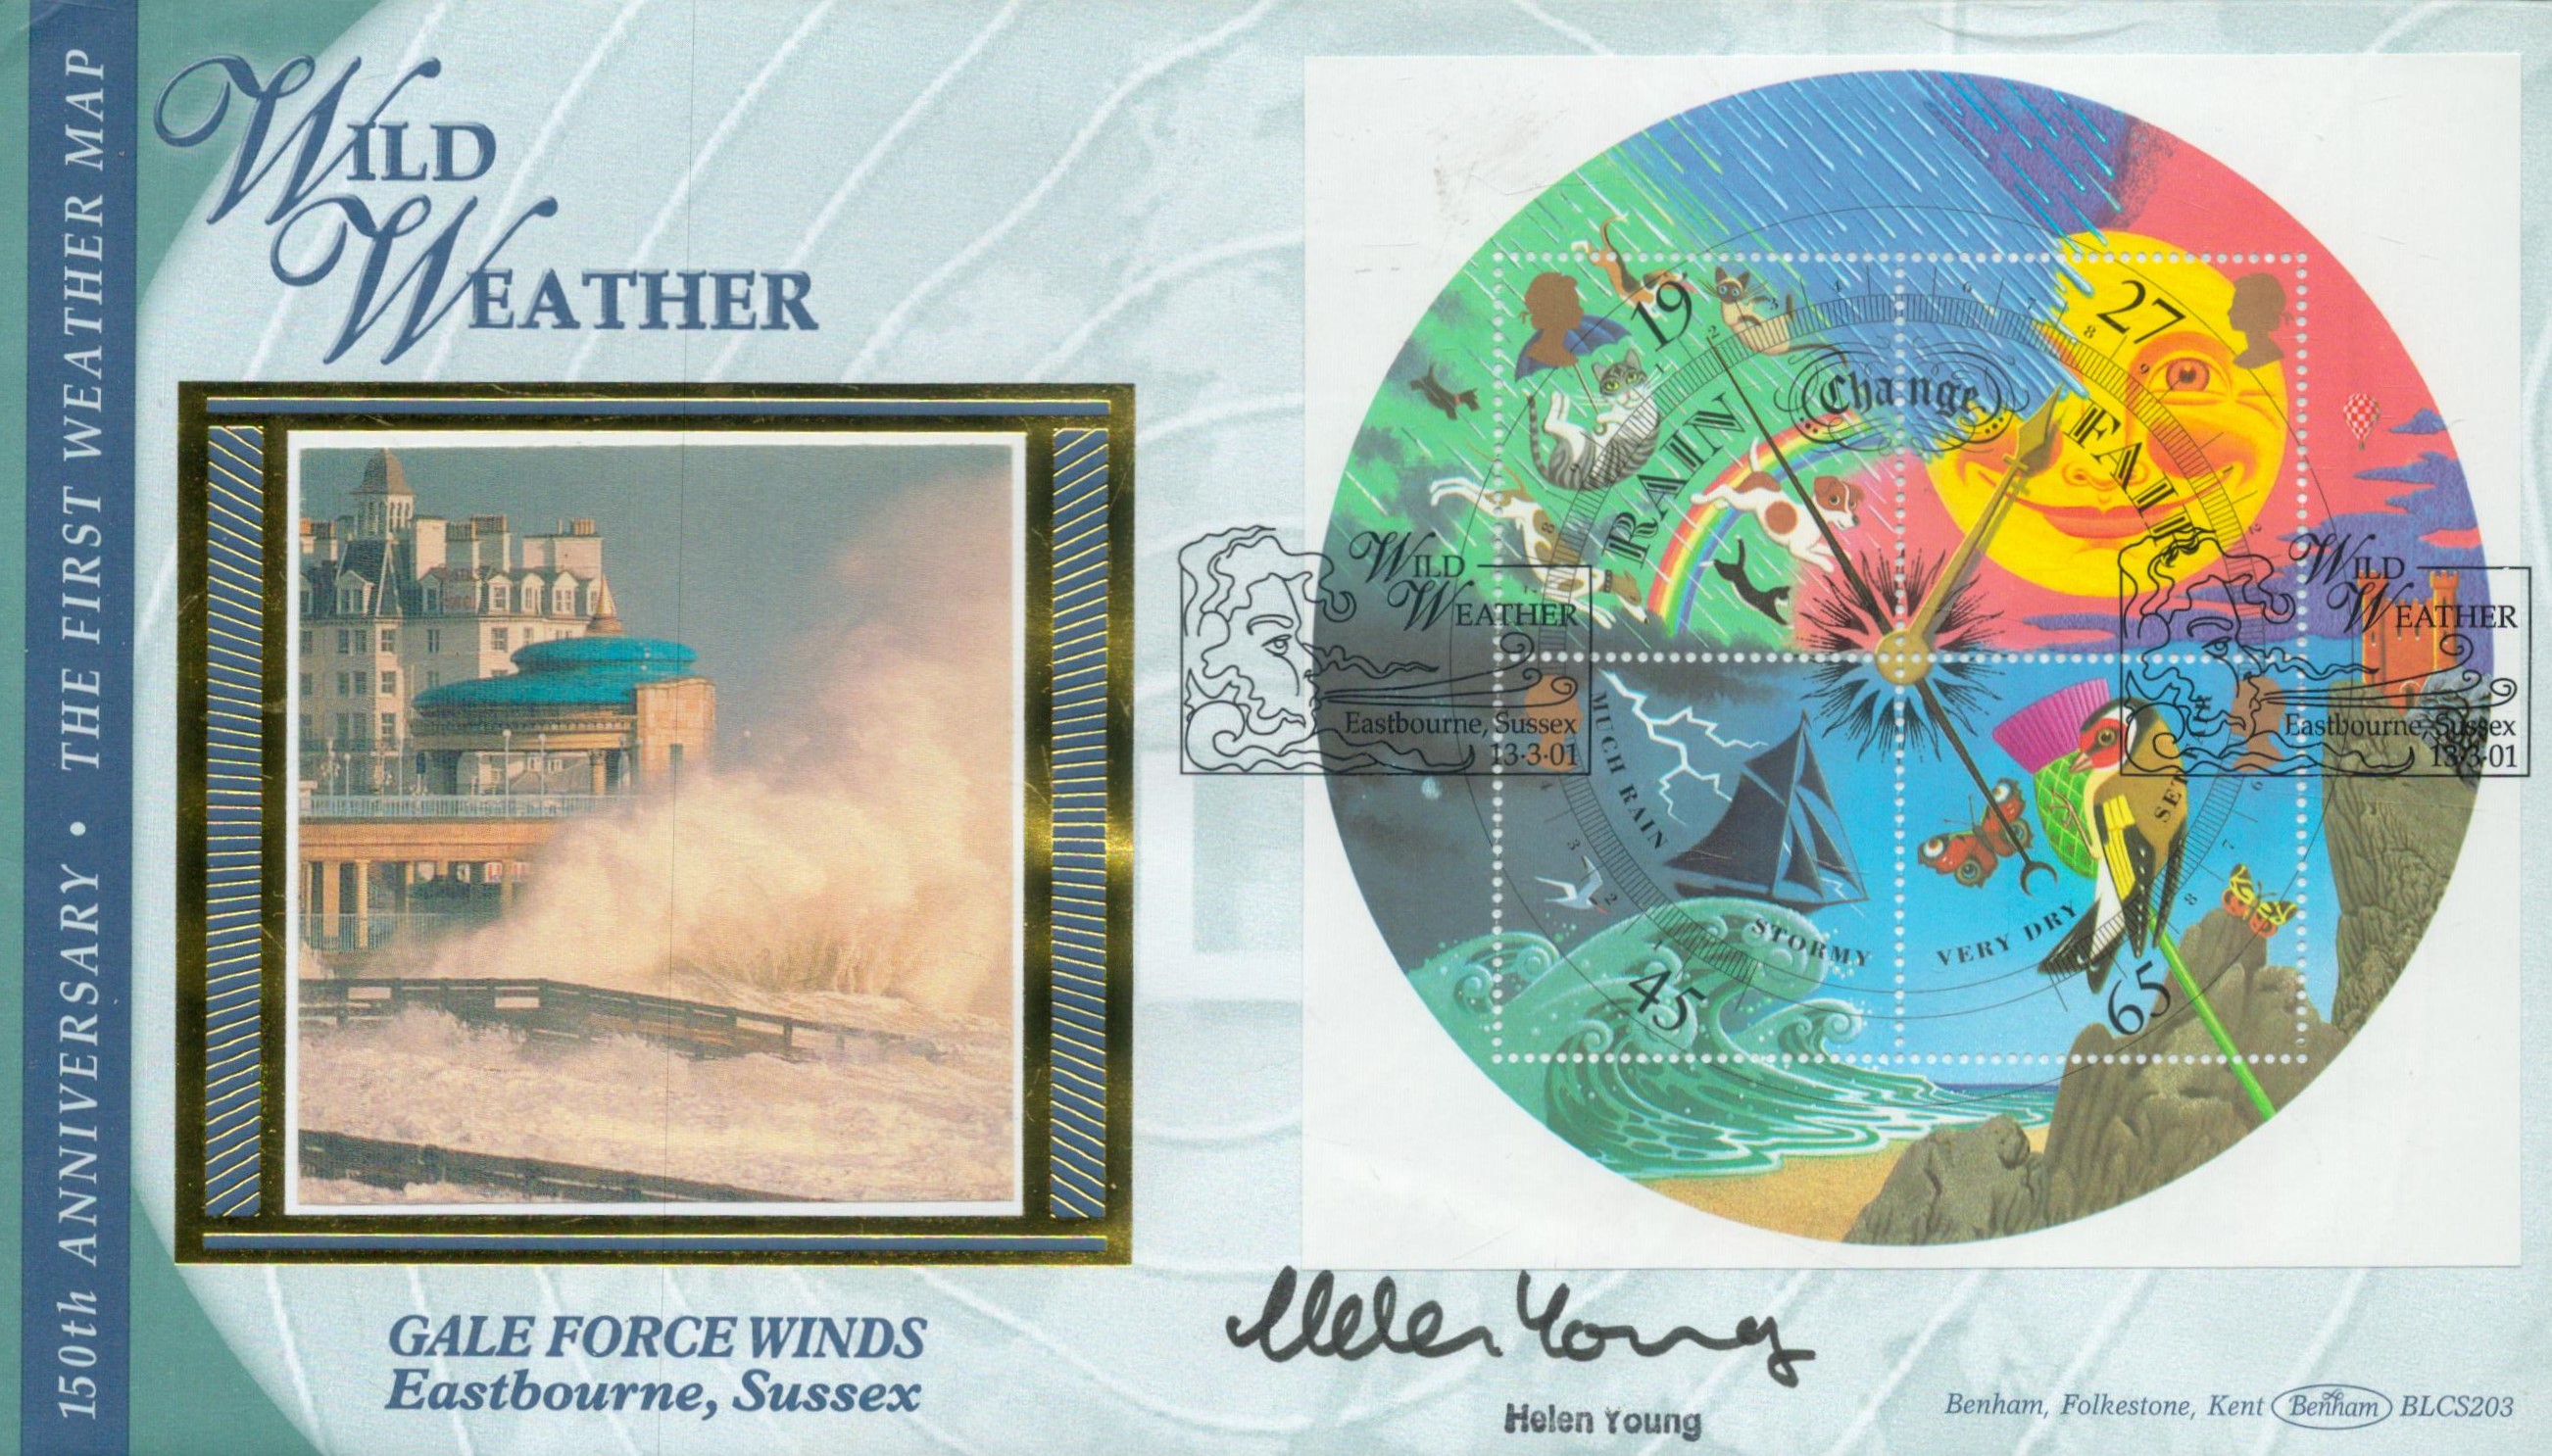 Helen Young signed Wild Weather FDC. 13/3/01 Eastbourne postmark. Good condition. All autographs